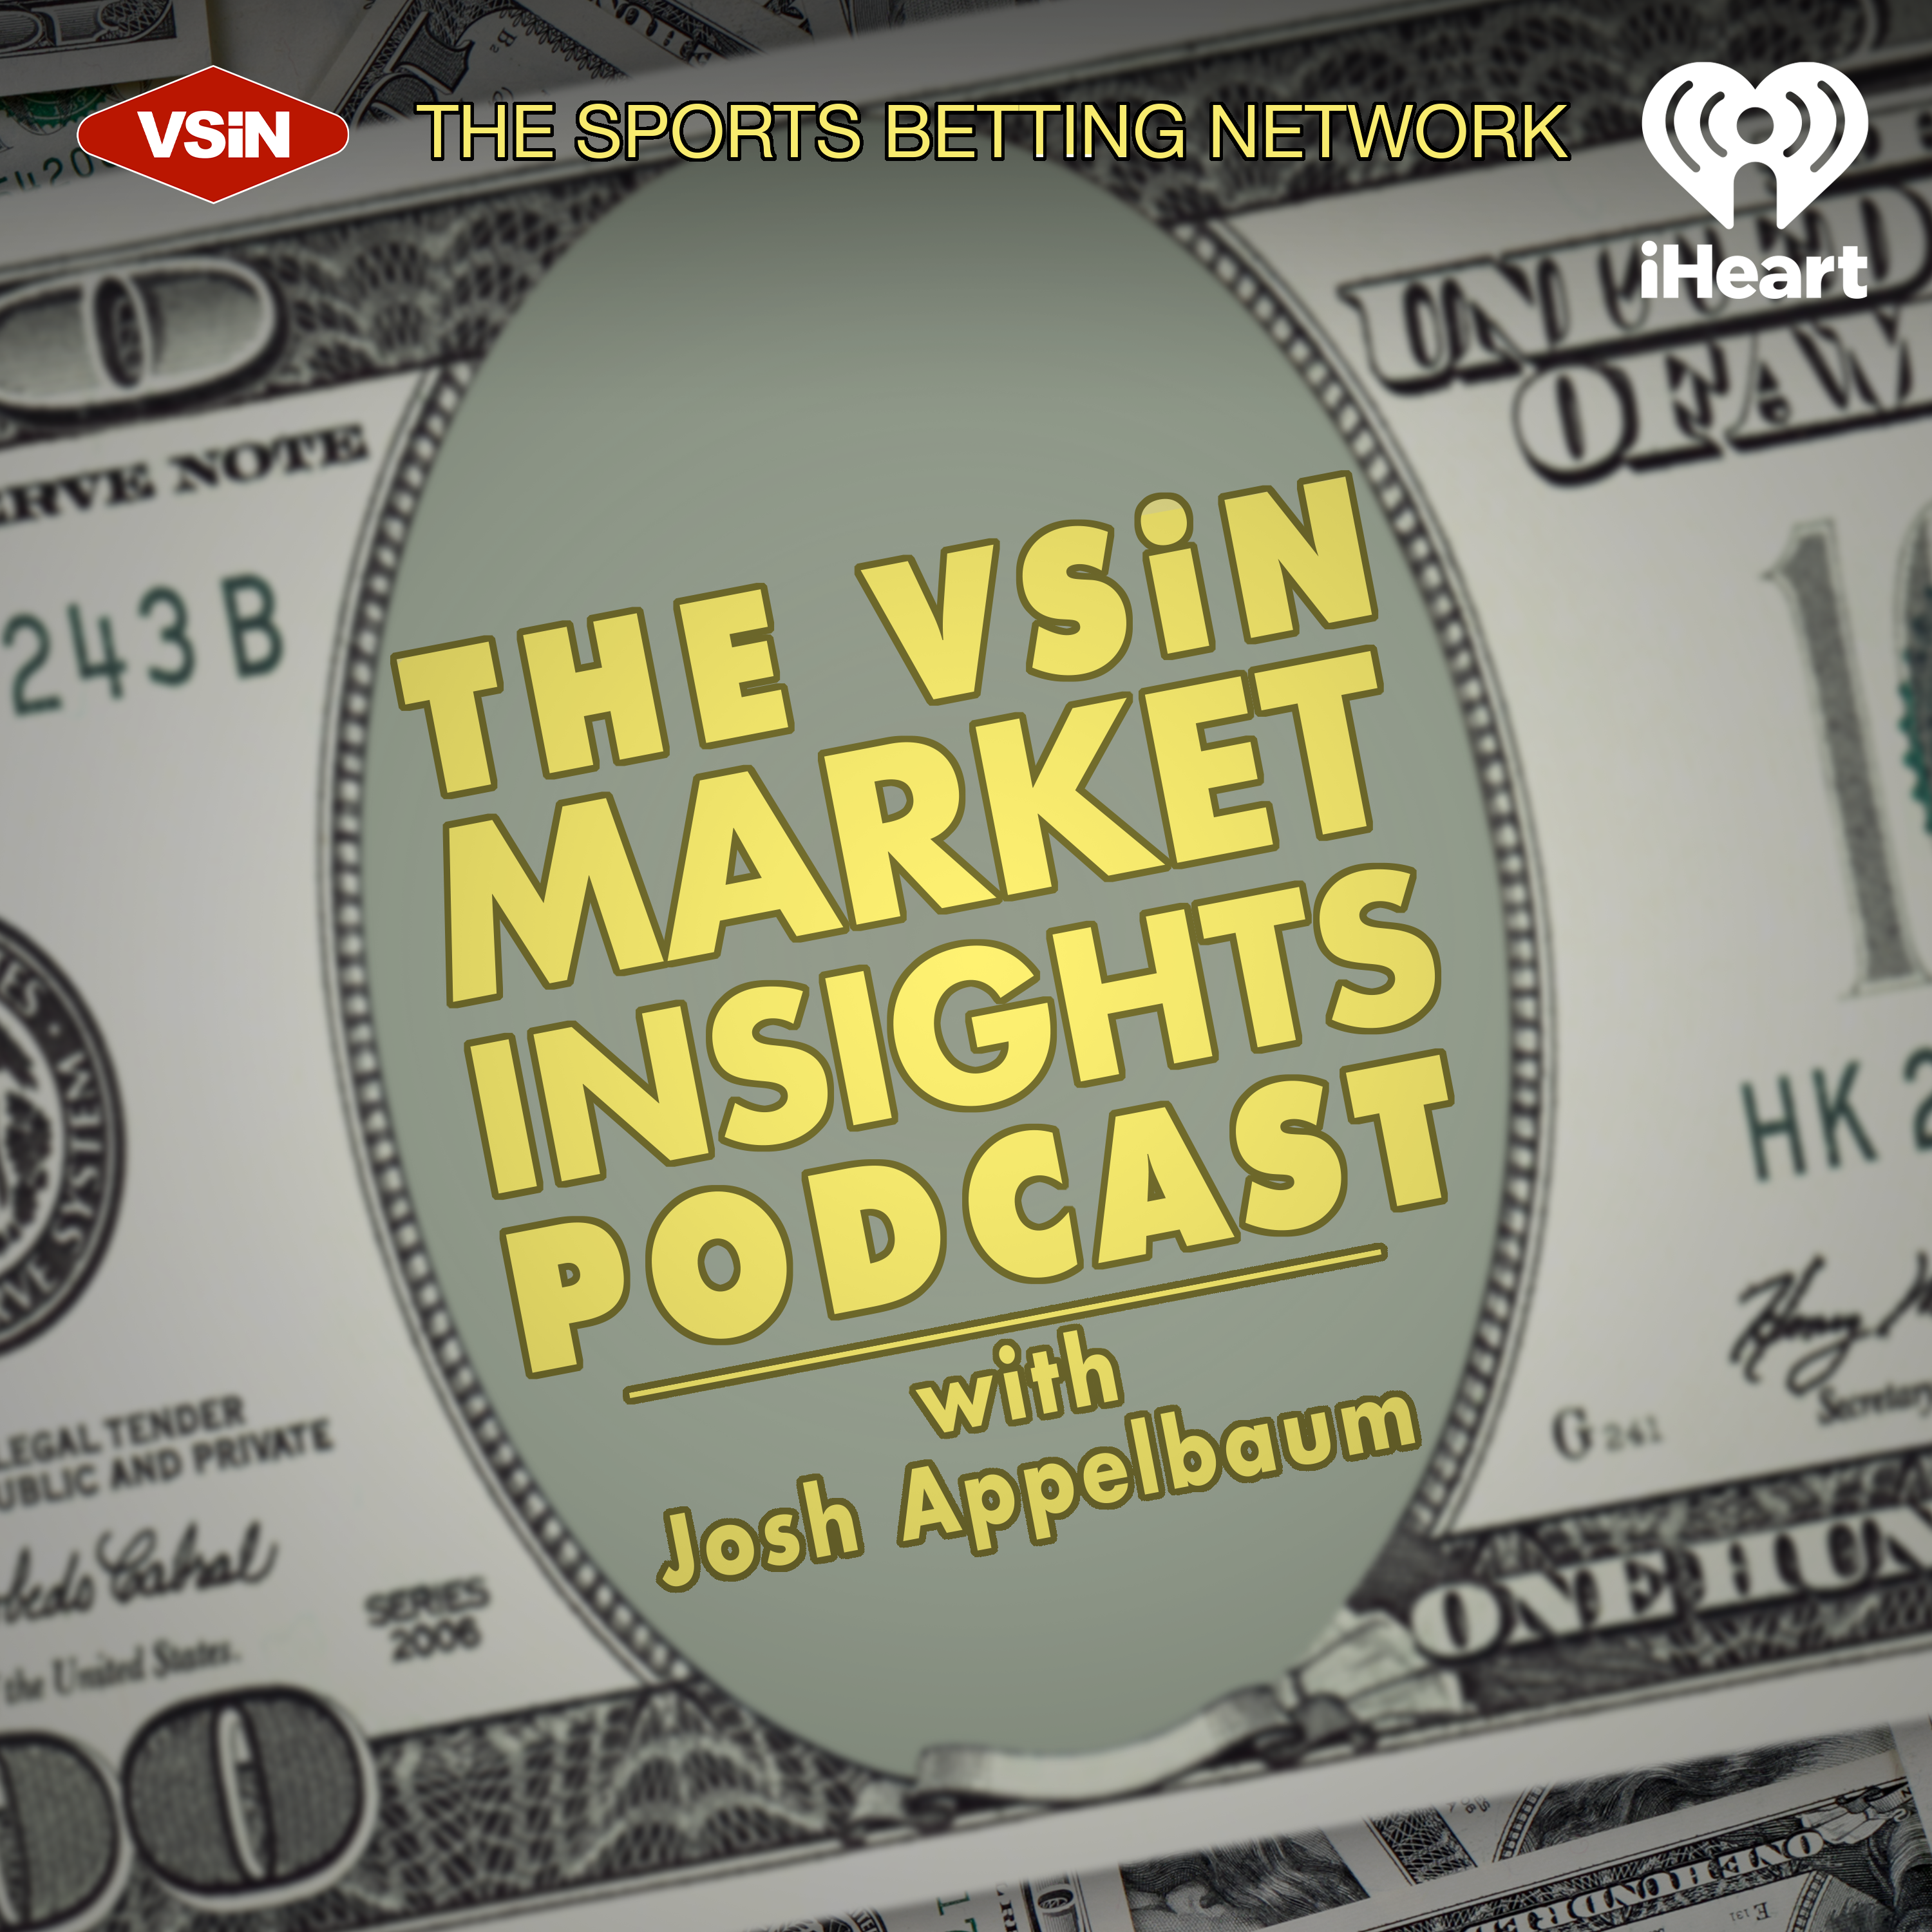 The VSiN Market Insights Podcast with Josh Appelbaum | March 7, 2022